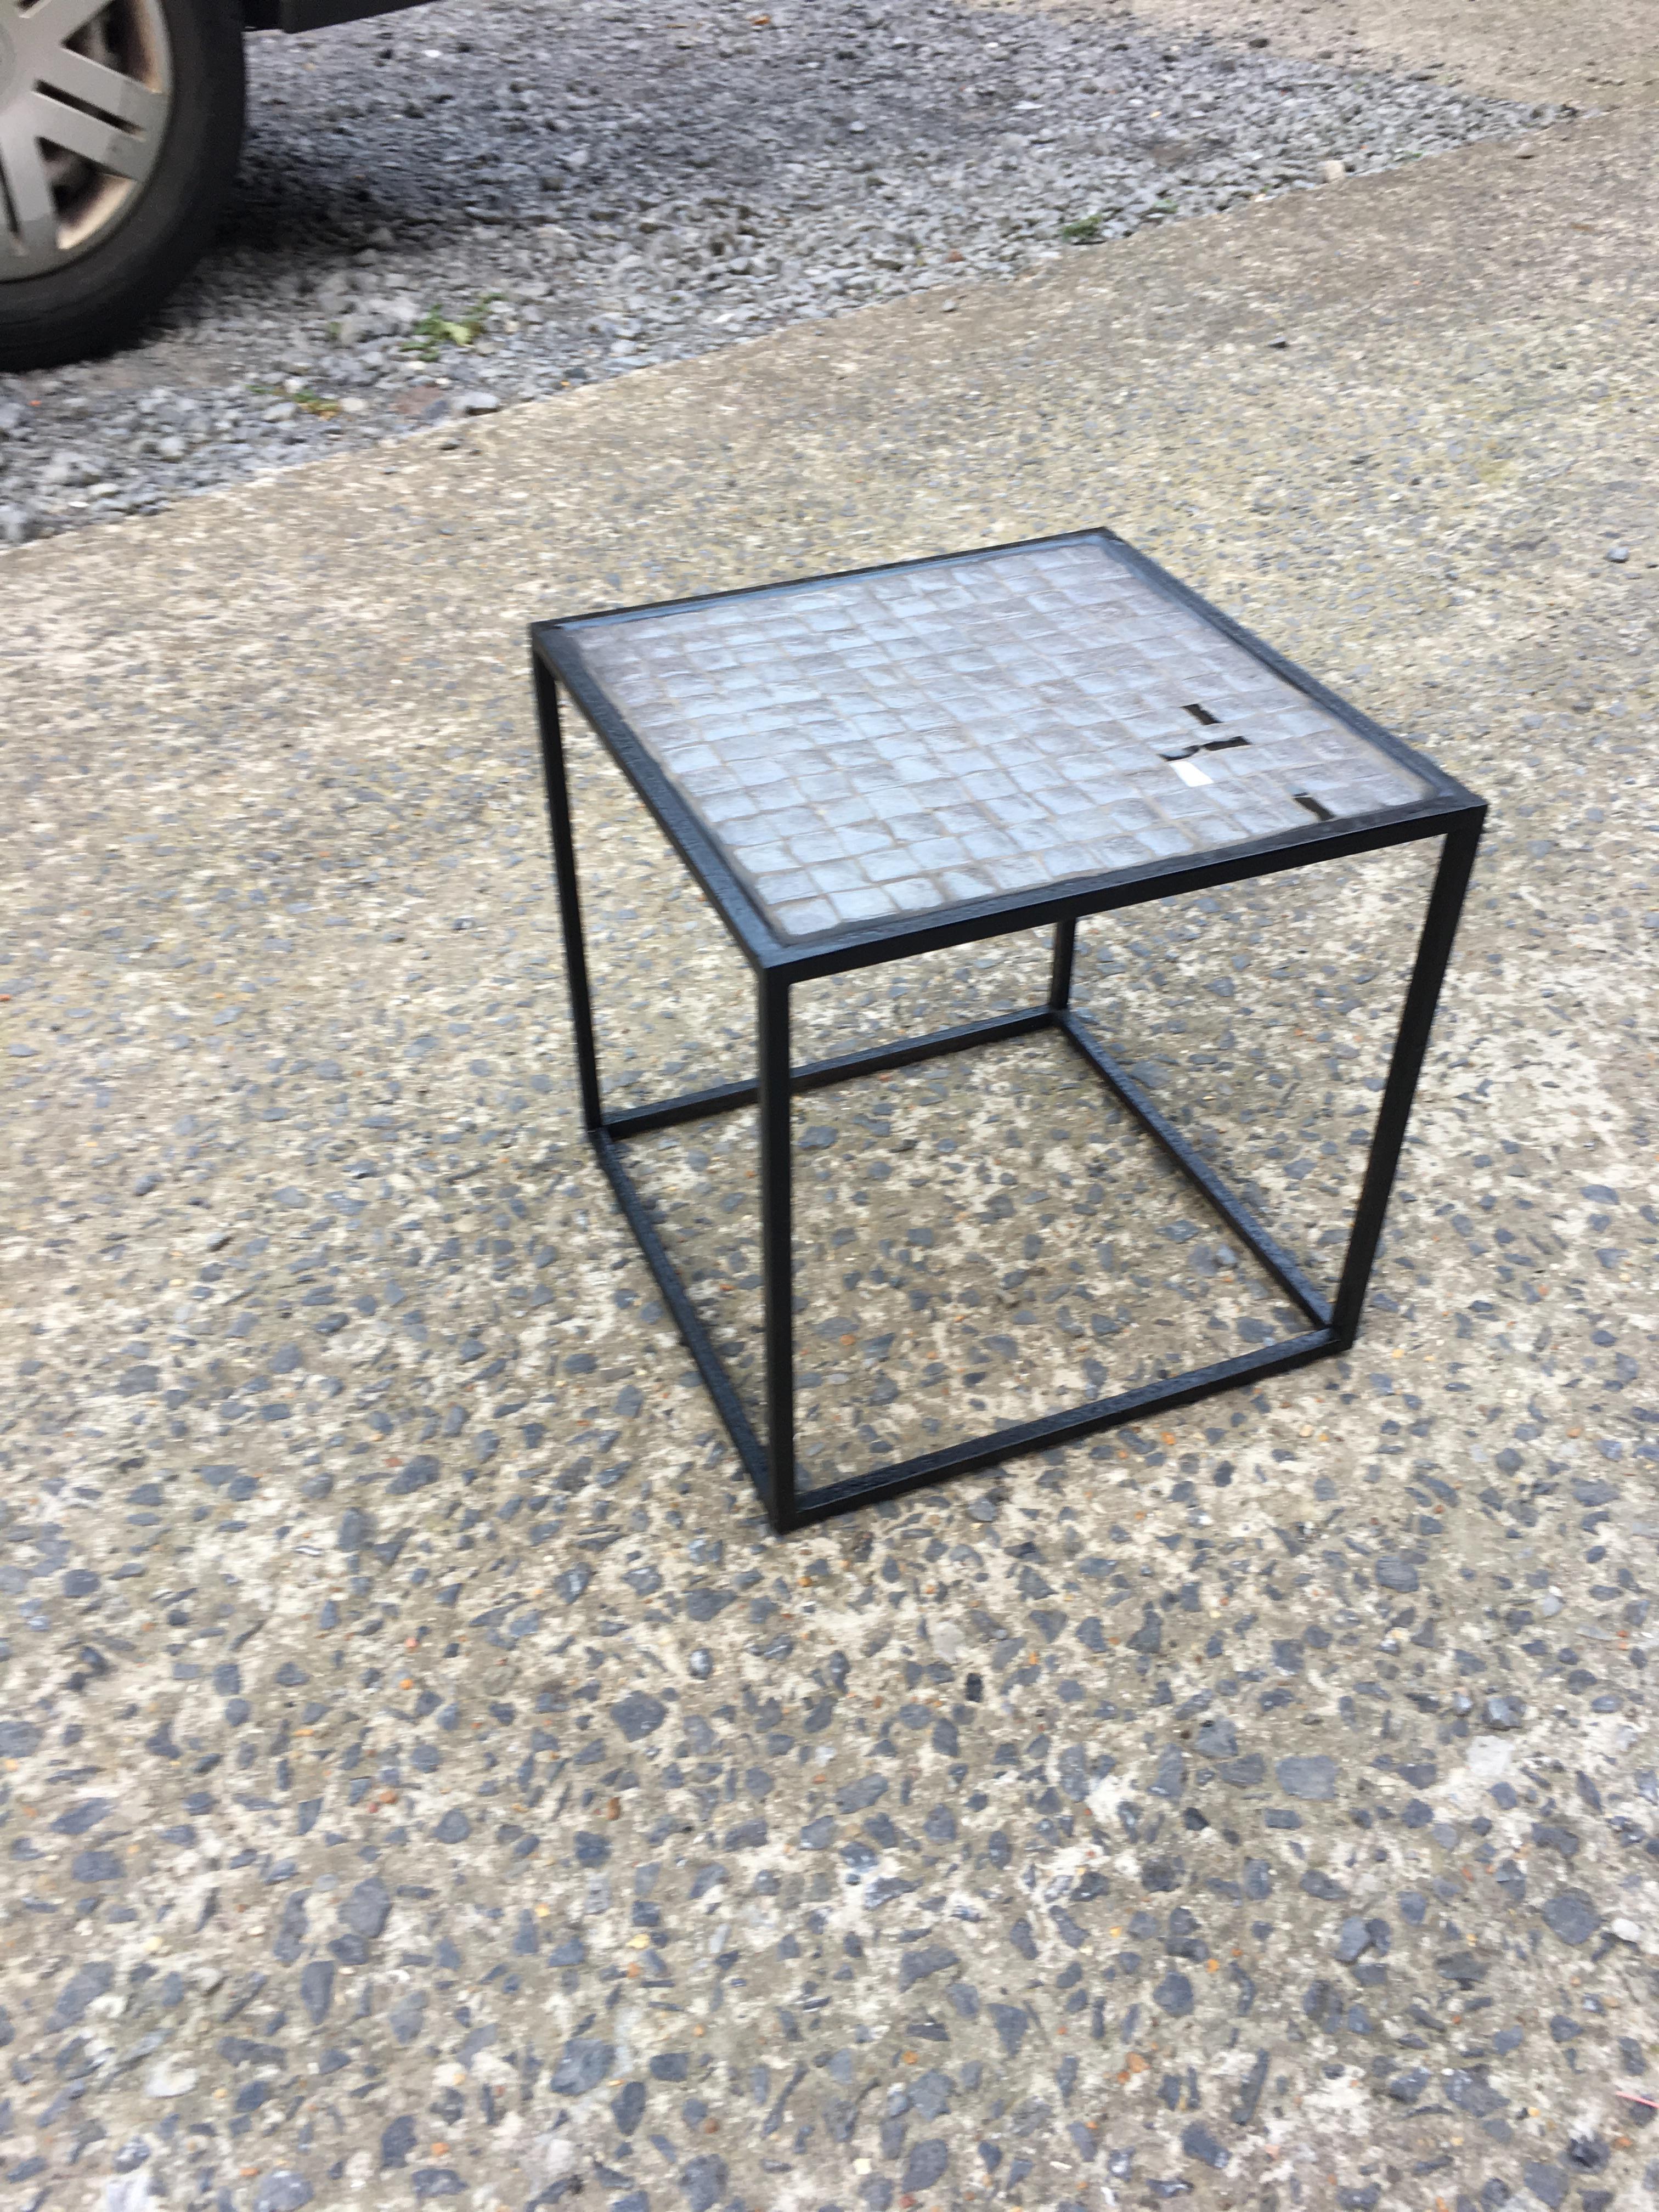 Mado Jolain. Coffee table circa 1950-1960 with wrought iron structure
tray made of ceramic tiles.